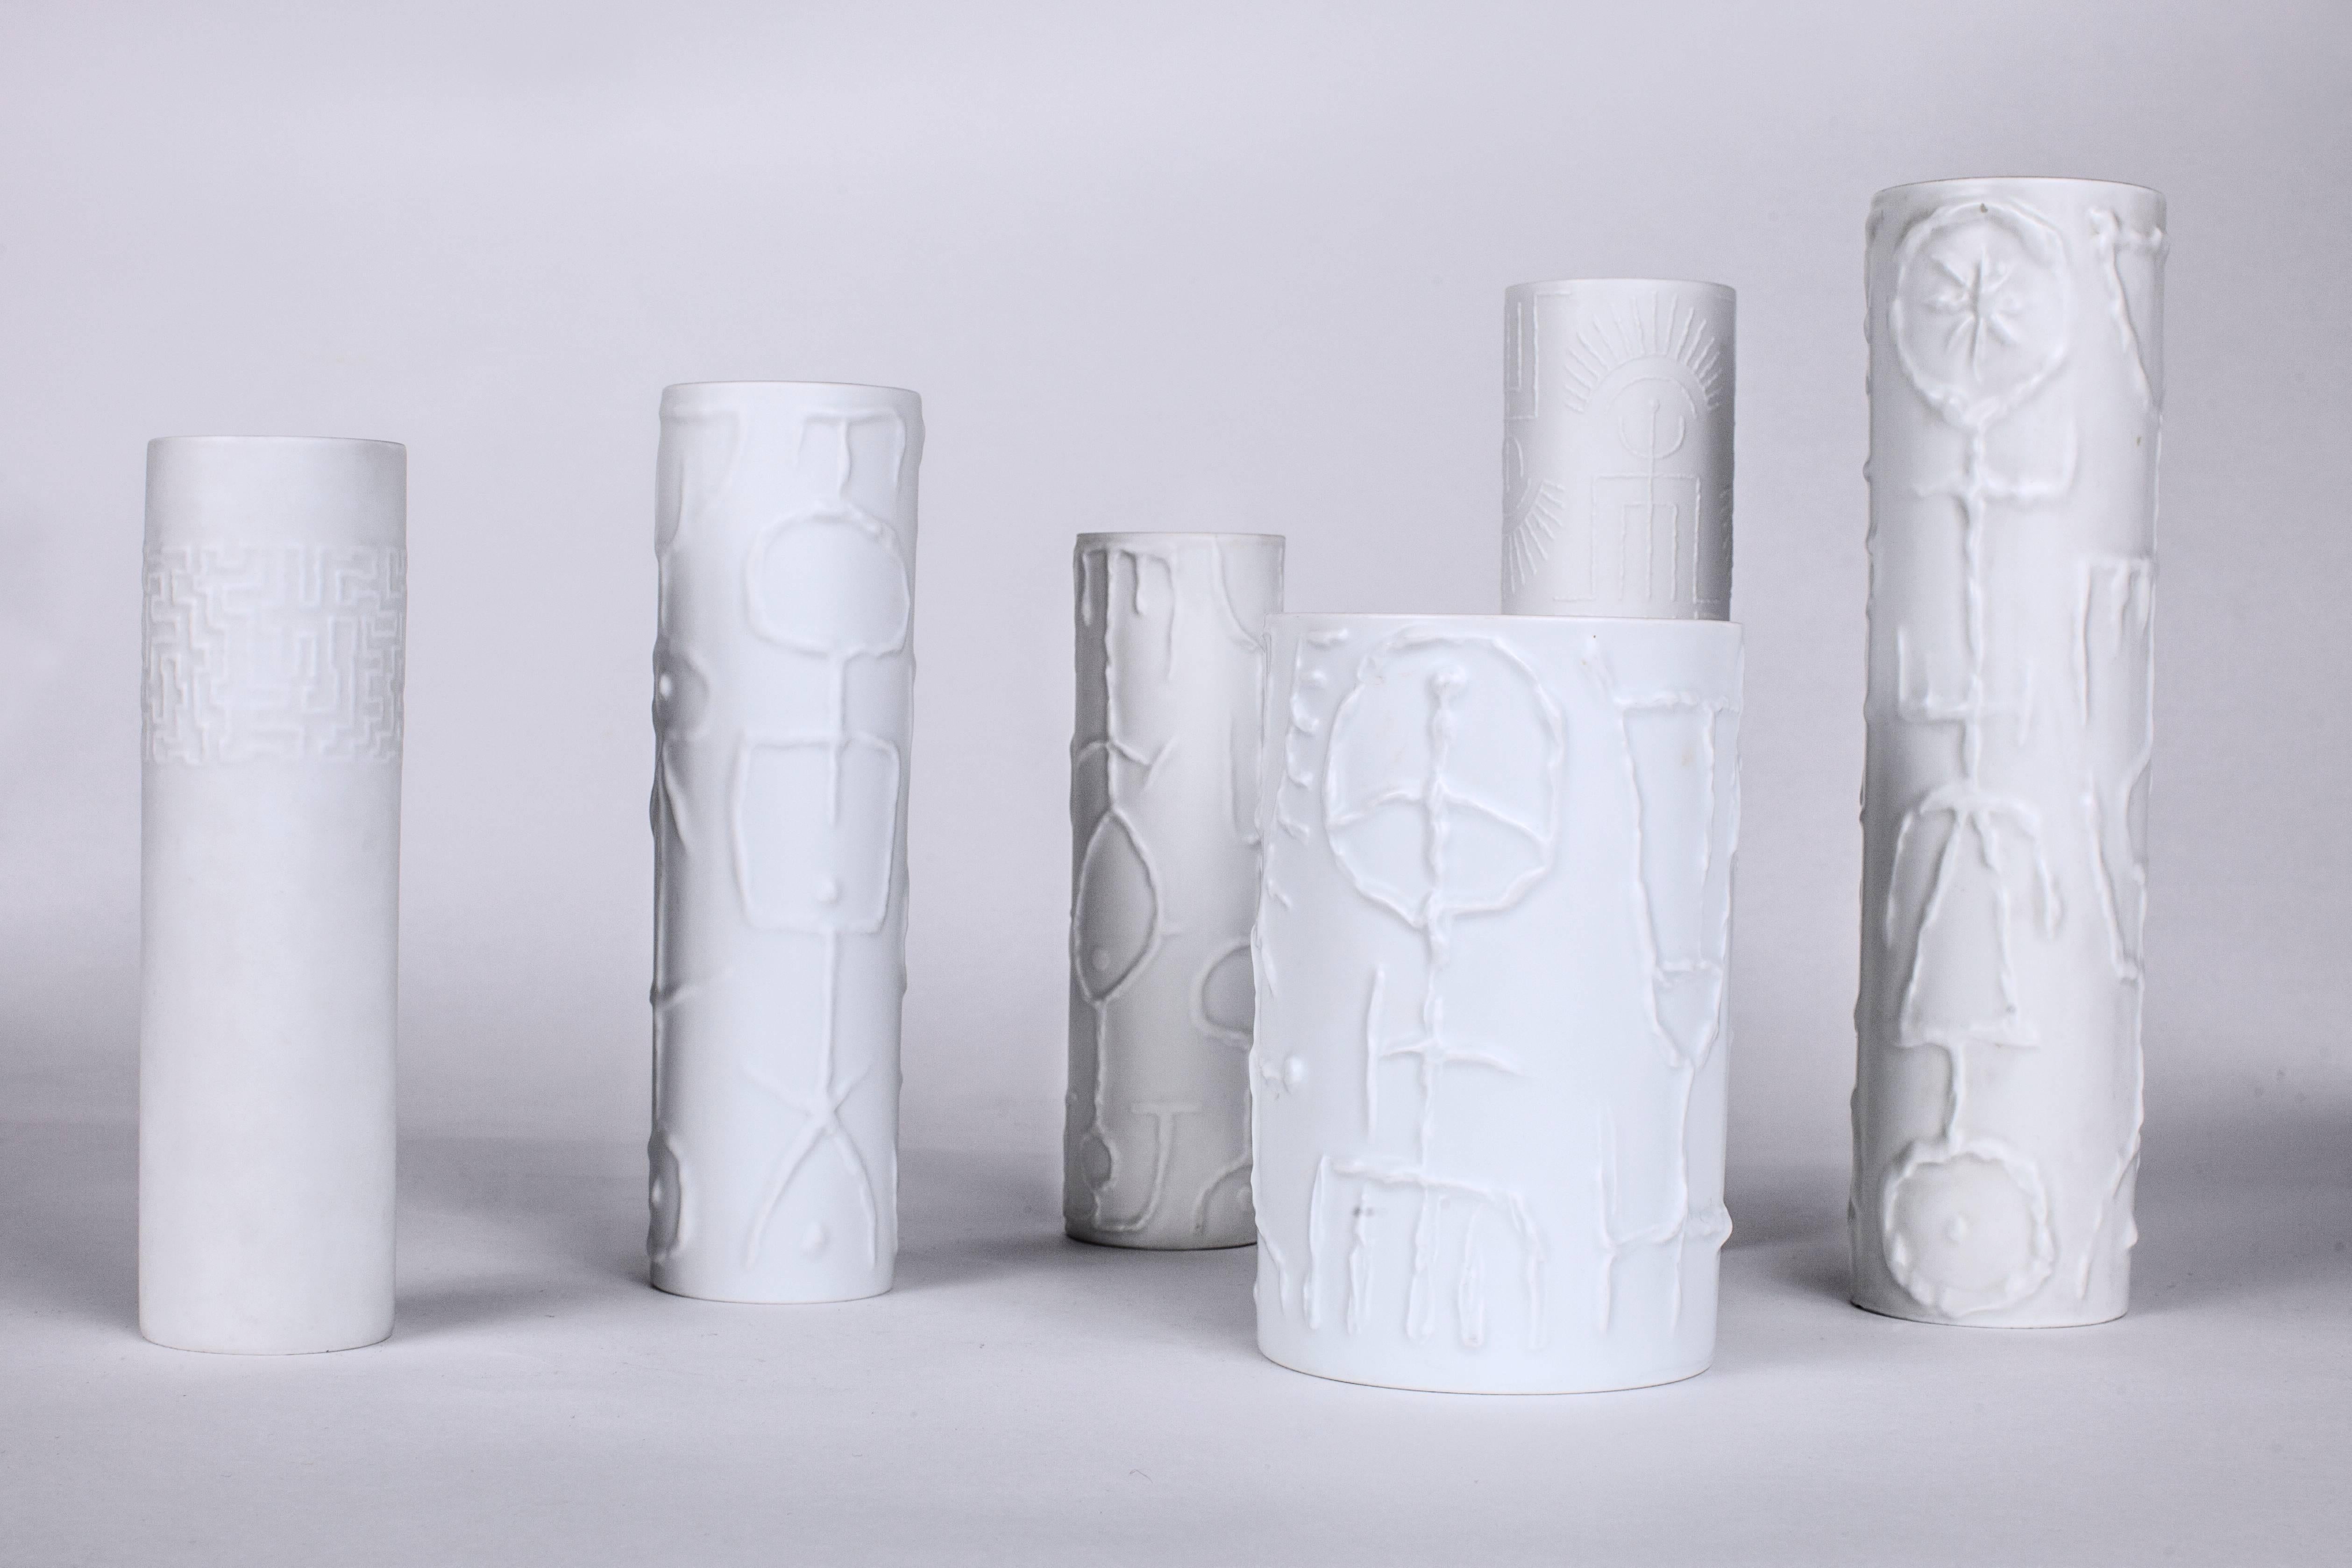 Cuno Fischer (1914–1973)

Set of six graphic, modernist glazed porcelain vases by German painter and designer Cuno fischer for Rosenthal, decorated with delicate raised geometric glyphs.

Various heights and diameters: 2.5’’ to 5’’ Ø x 7.5’’ to